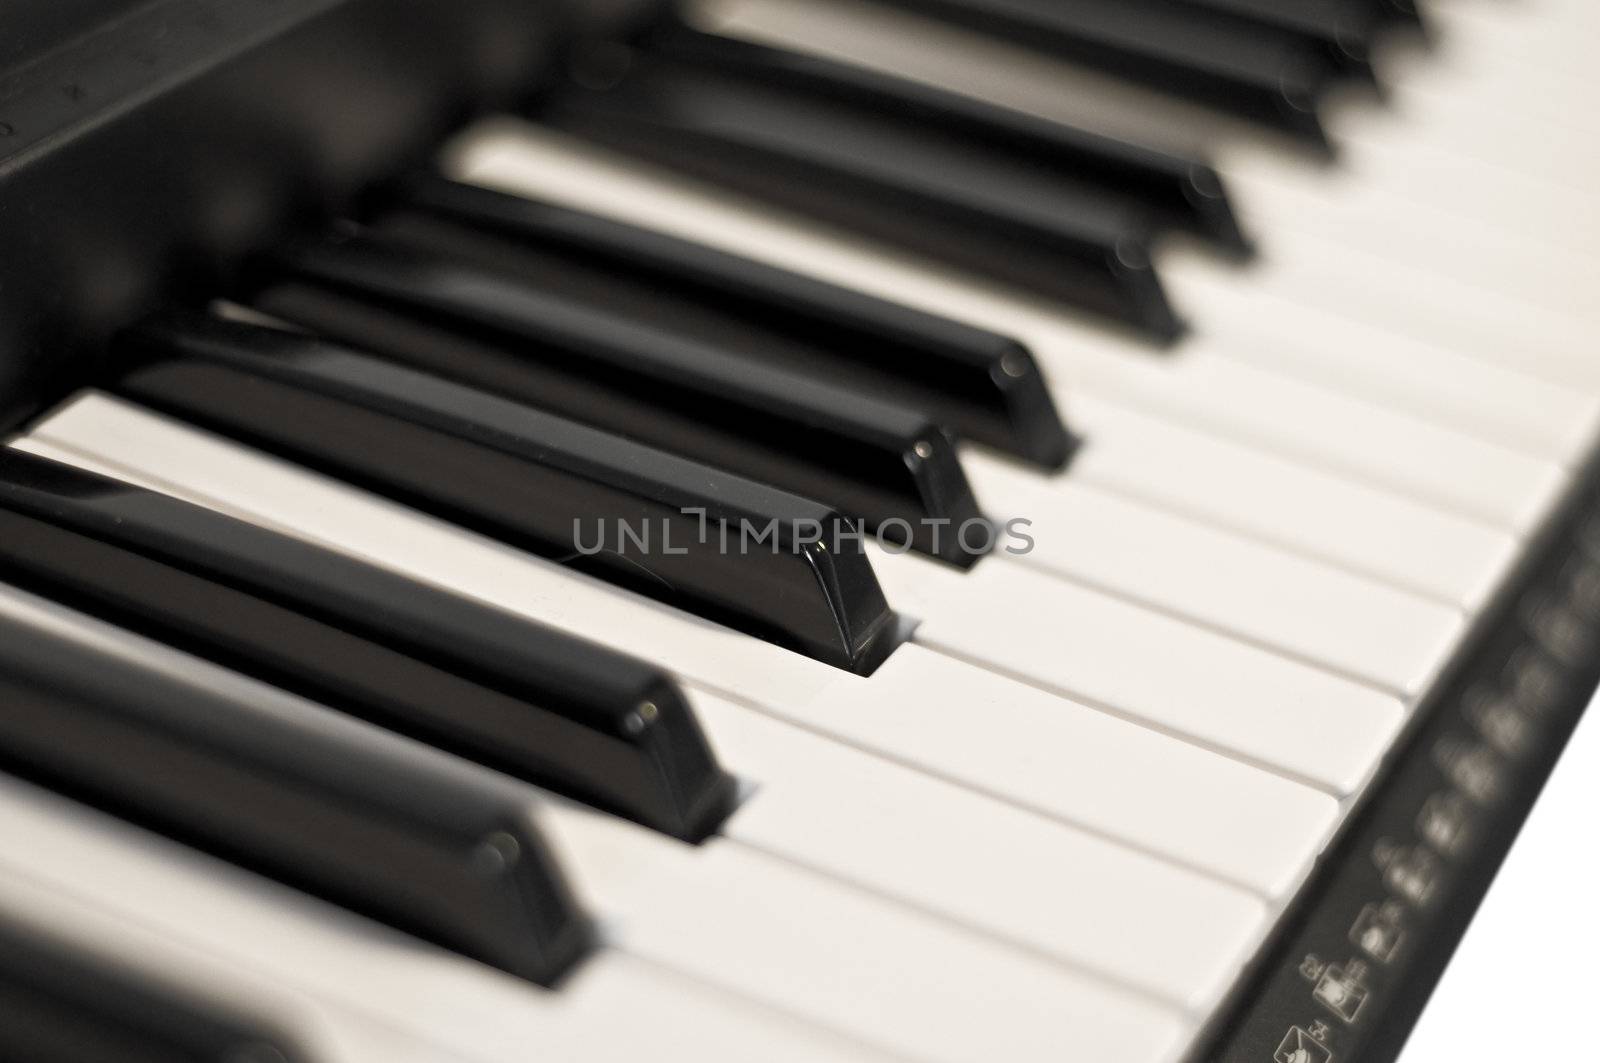 Piano keys close up. On a white background. Selective focus on one of the keys. Blur